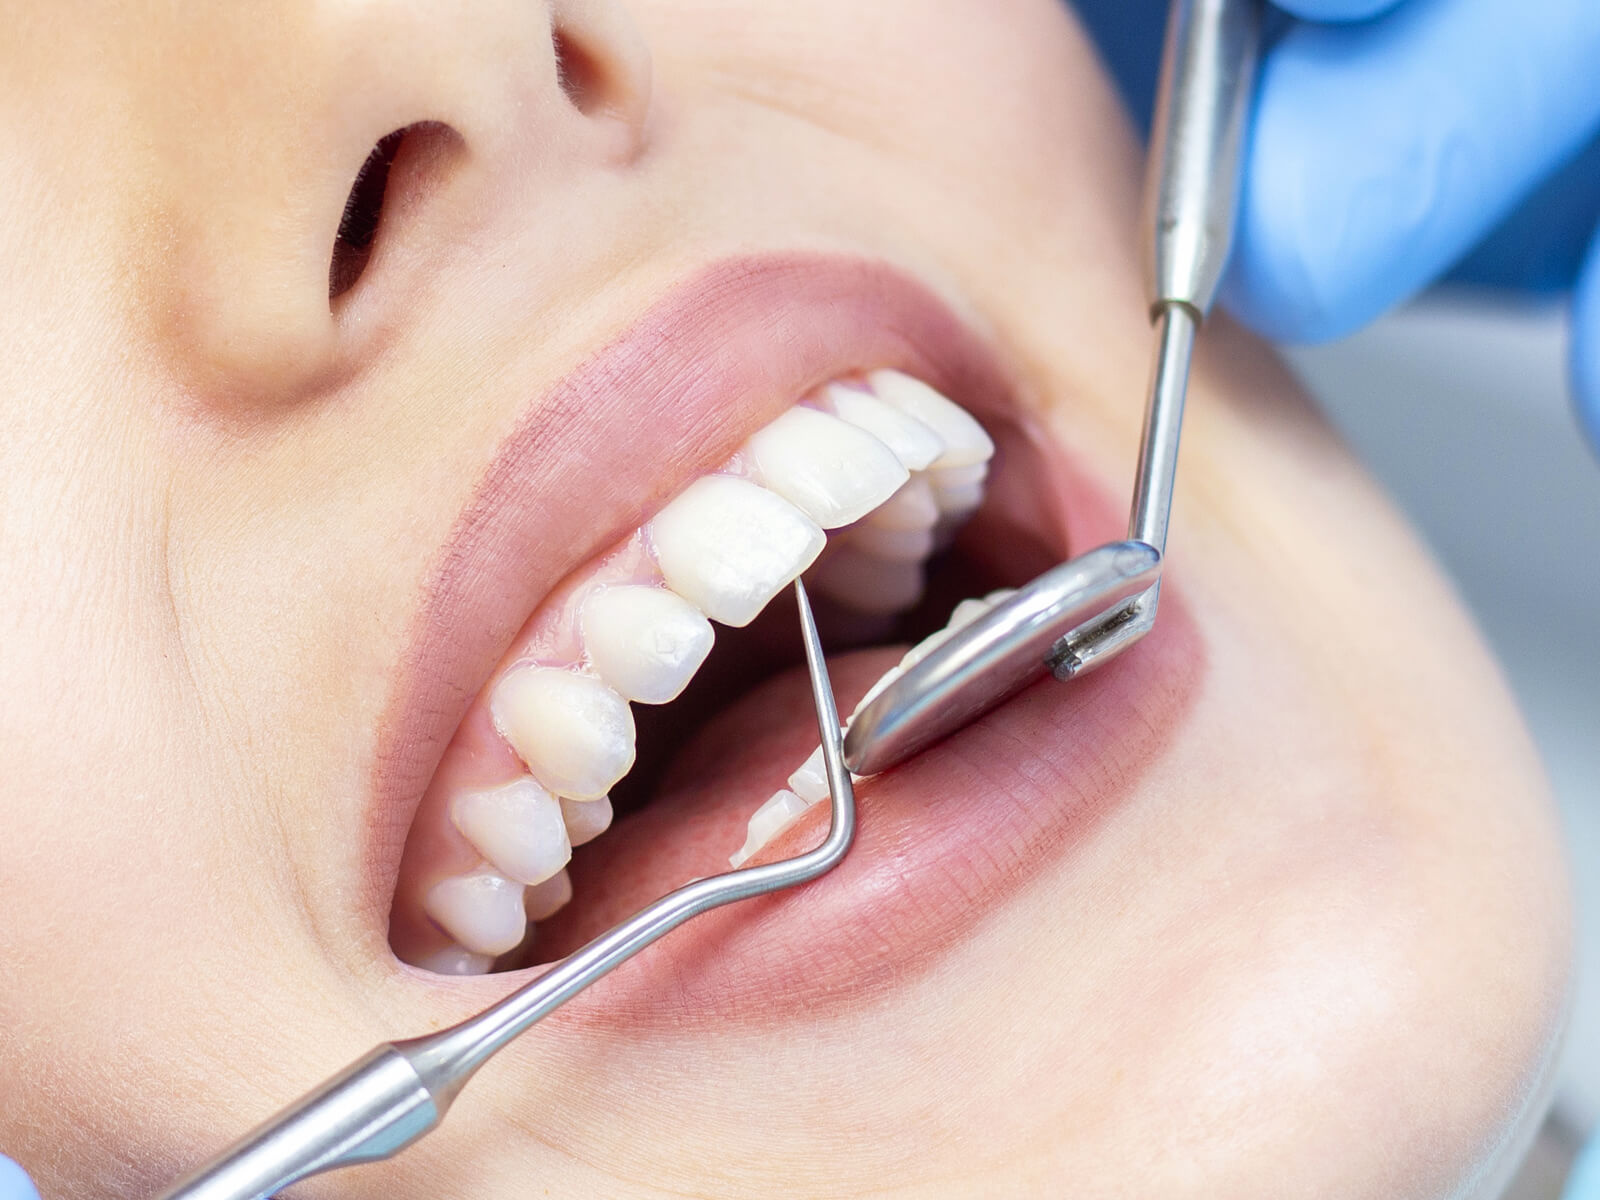 How often should you get a dental cleaning?